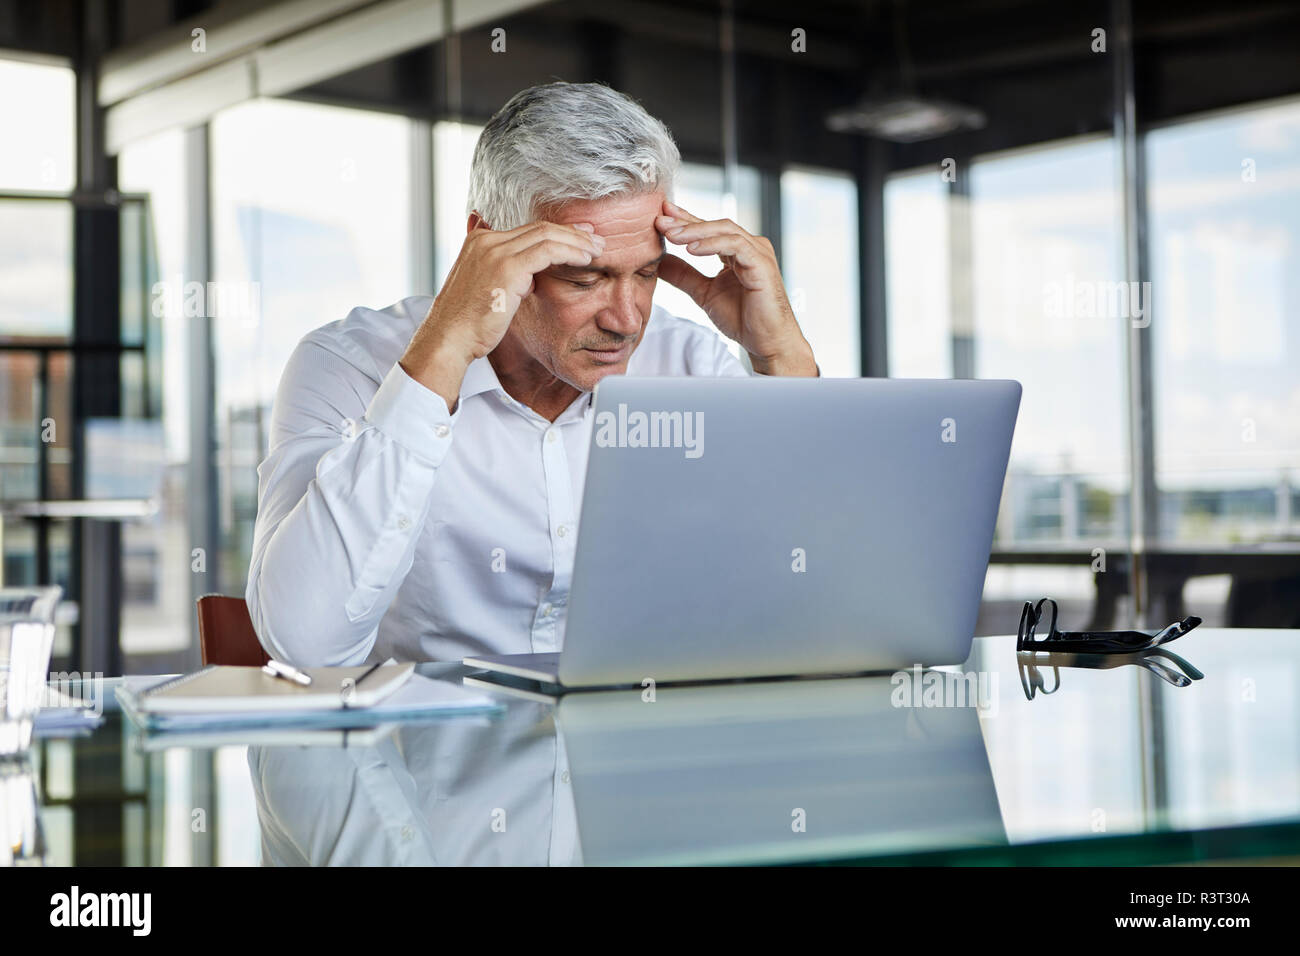 Stressed businessman sitting at desk with laptop, holding his head Stock Photo